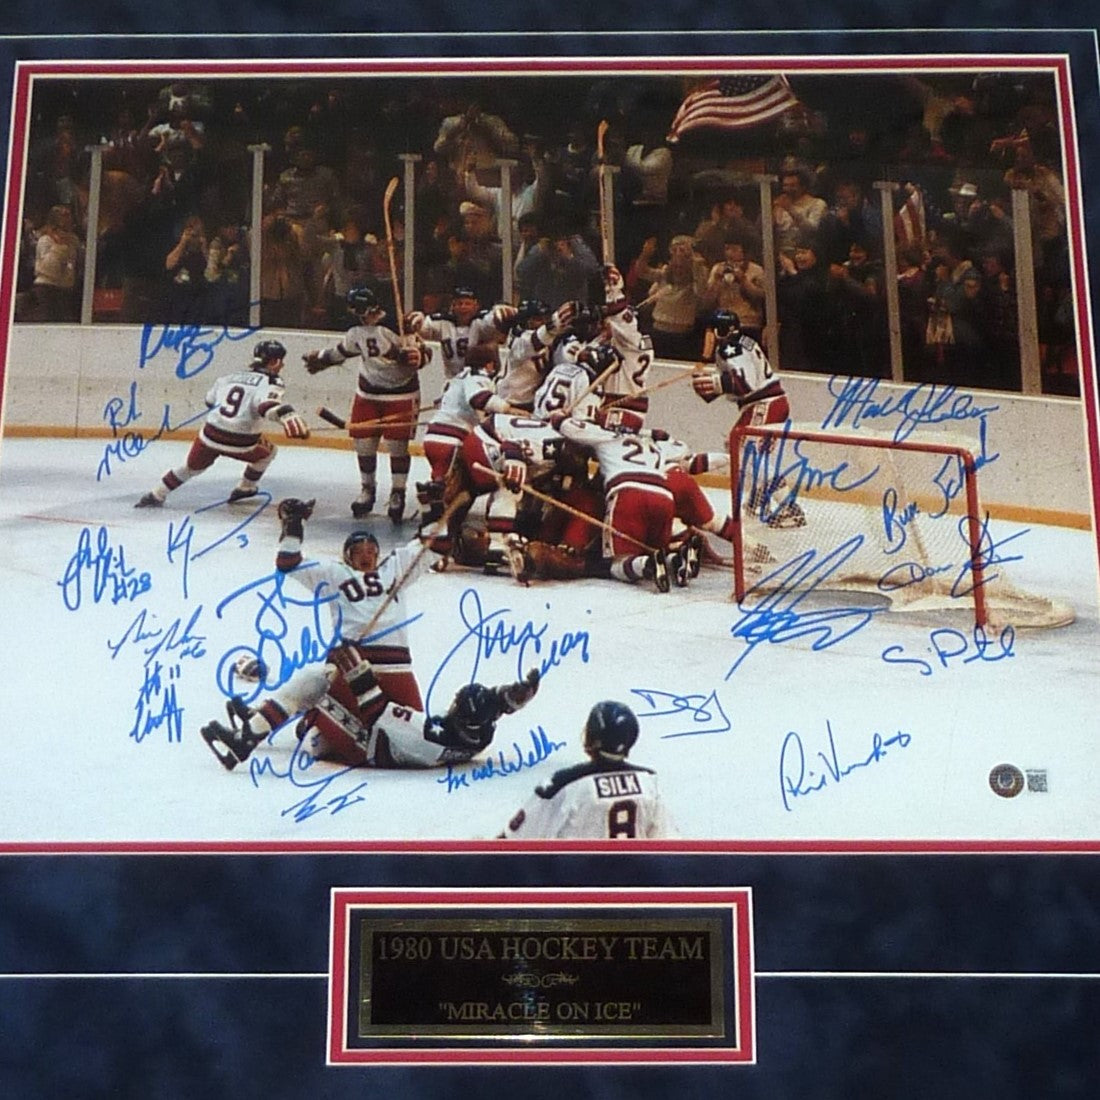 1980 U.S. Olympic Hockey Team Autographed (Miracle On Ice) Deluxe Framed 16x20 Photo - 18 Team Member Signatures - Beckett Witnessed